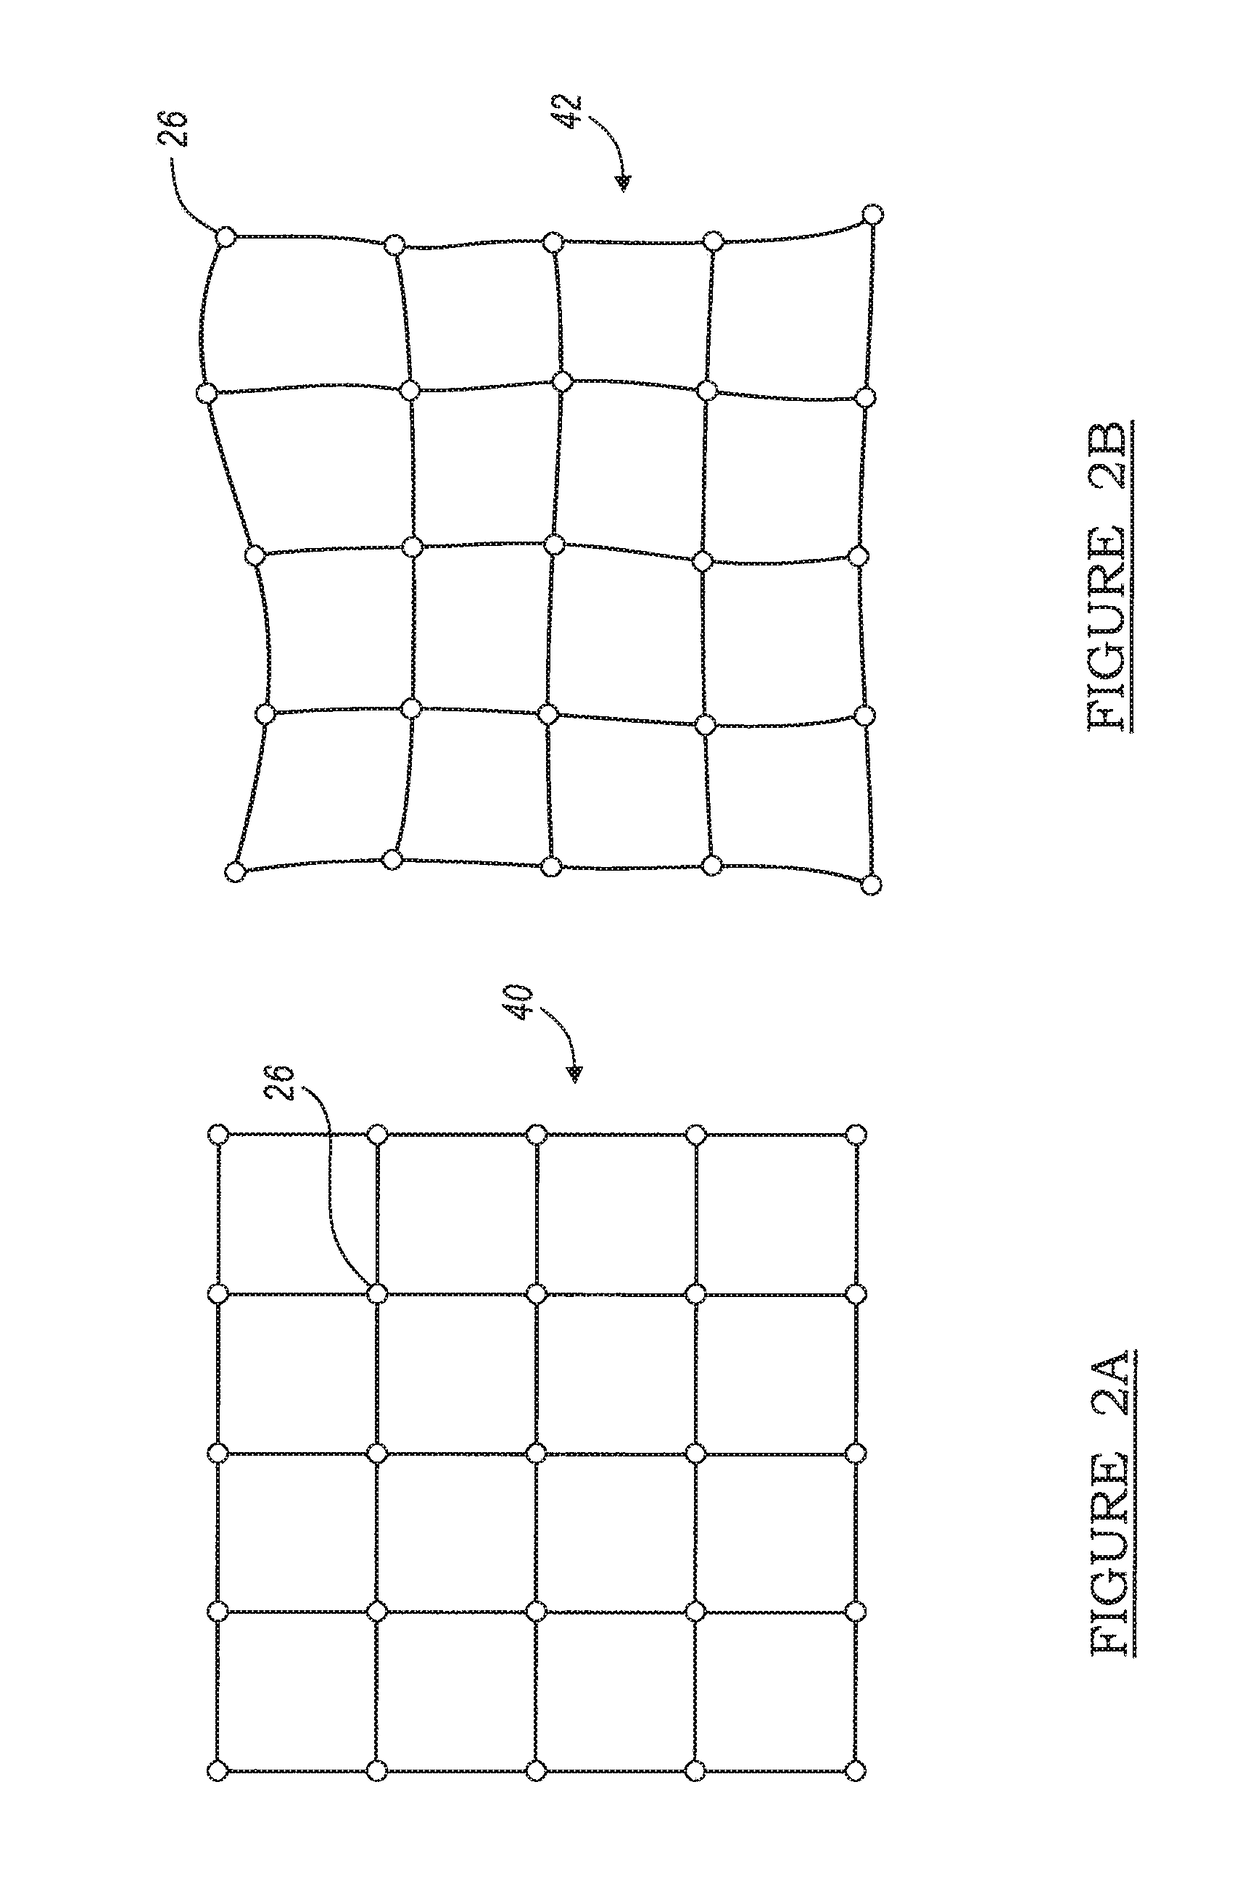 Navigation system for cardiac therapies using gating